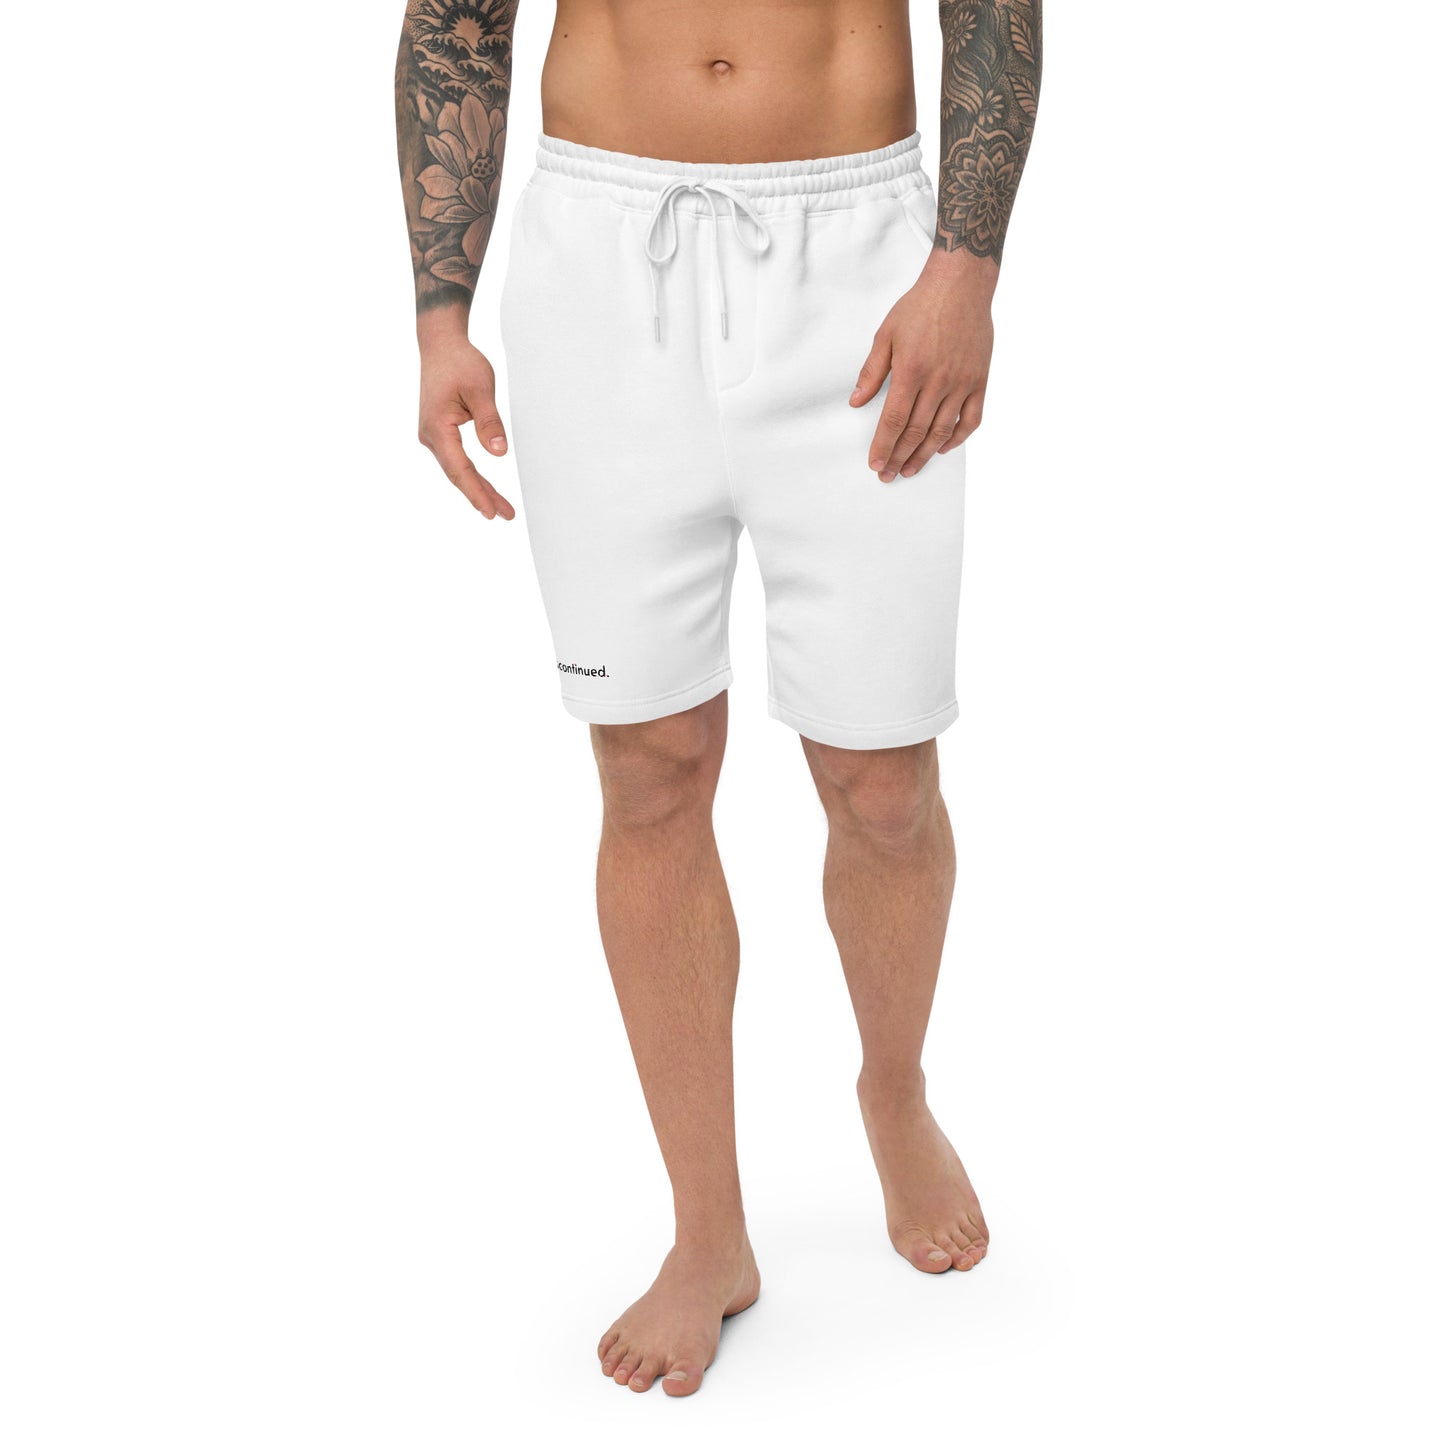 2Bdiscontinued.men's cotton fleece embroidered shorts